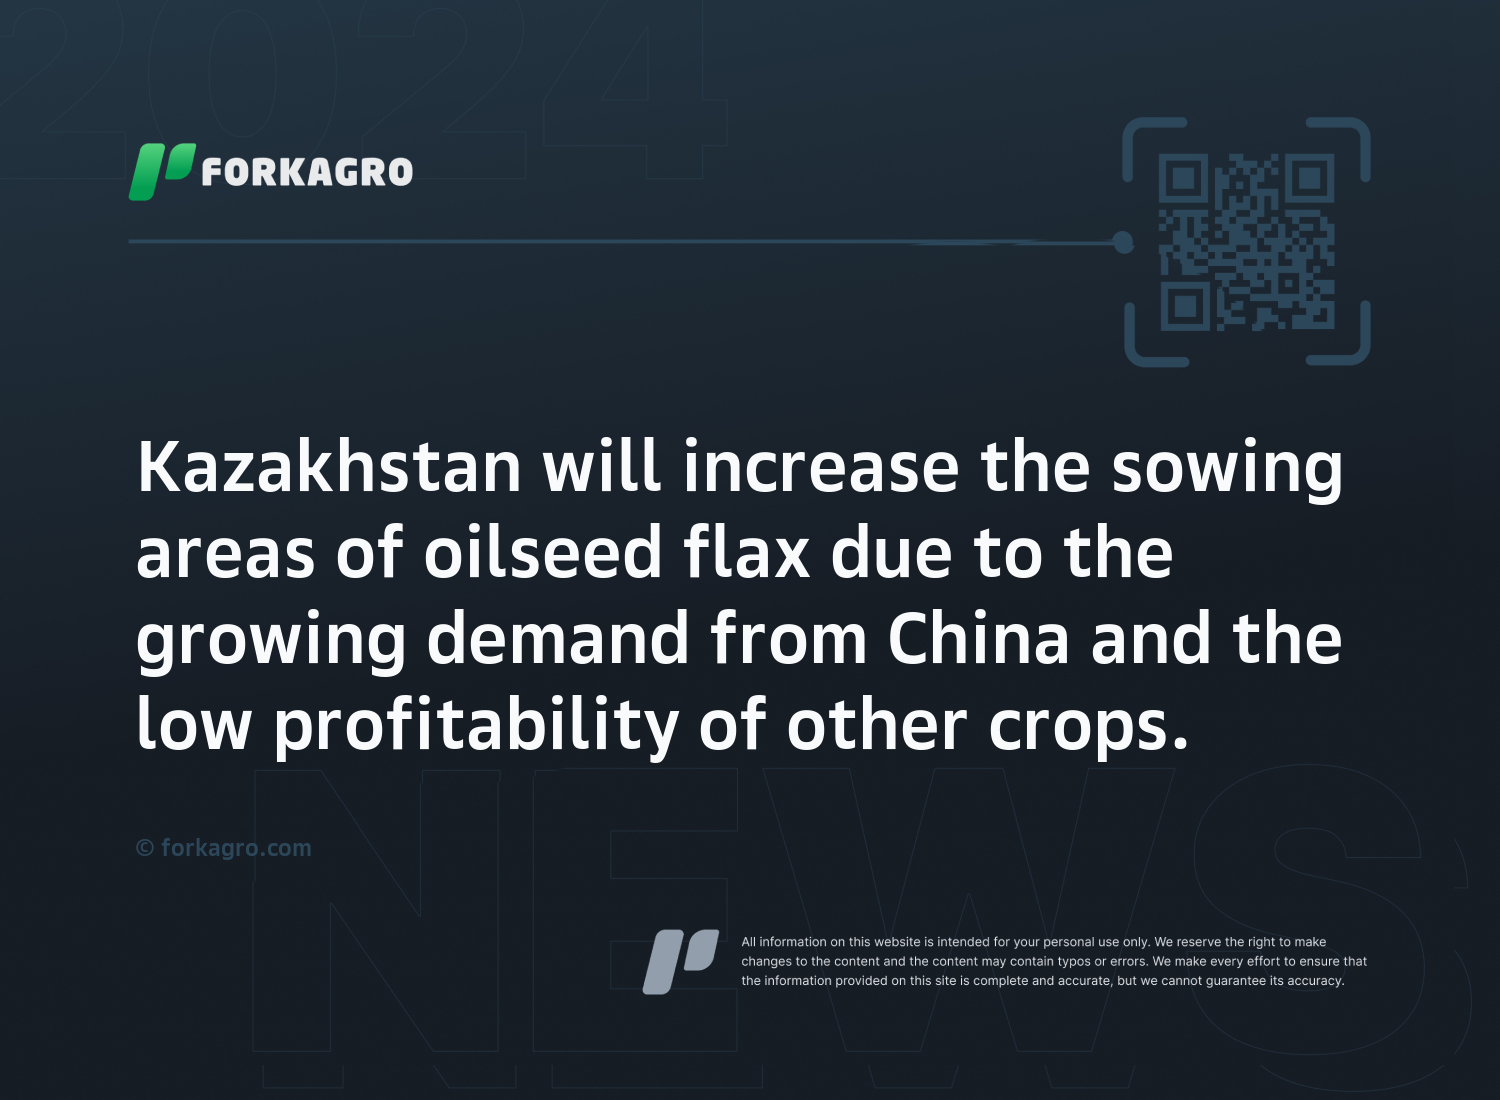 Kazakhstan will increase the sowing areas of oilseed flax due to the growing demand from China and the low profitability of other crops.